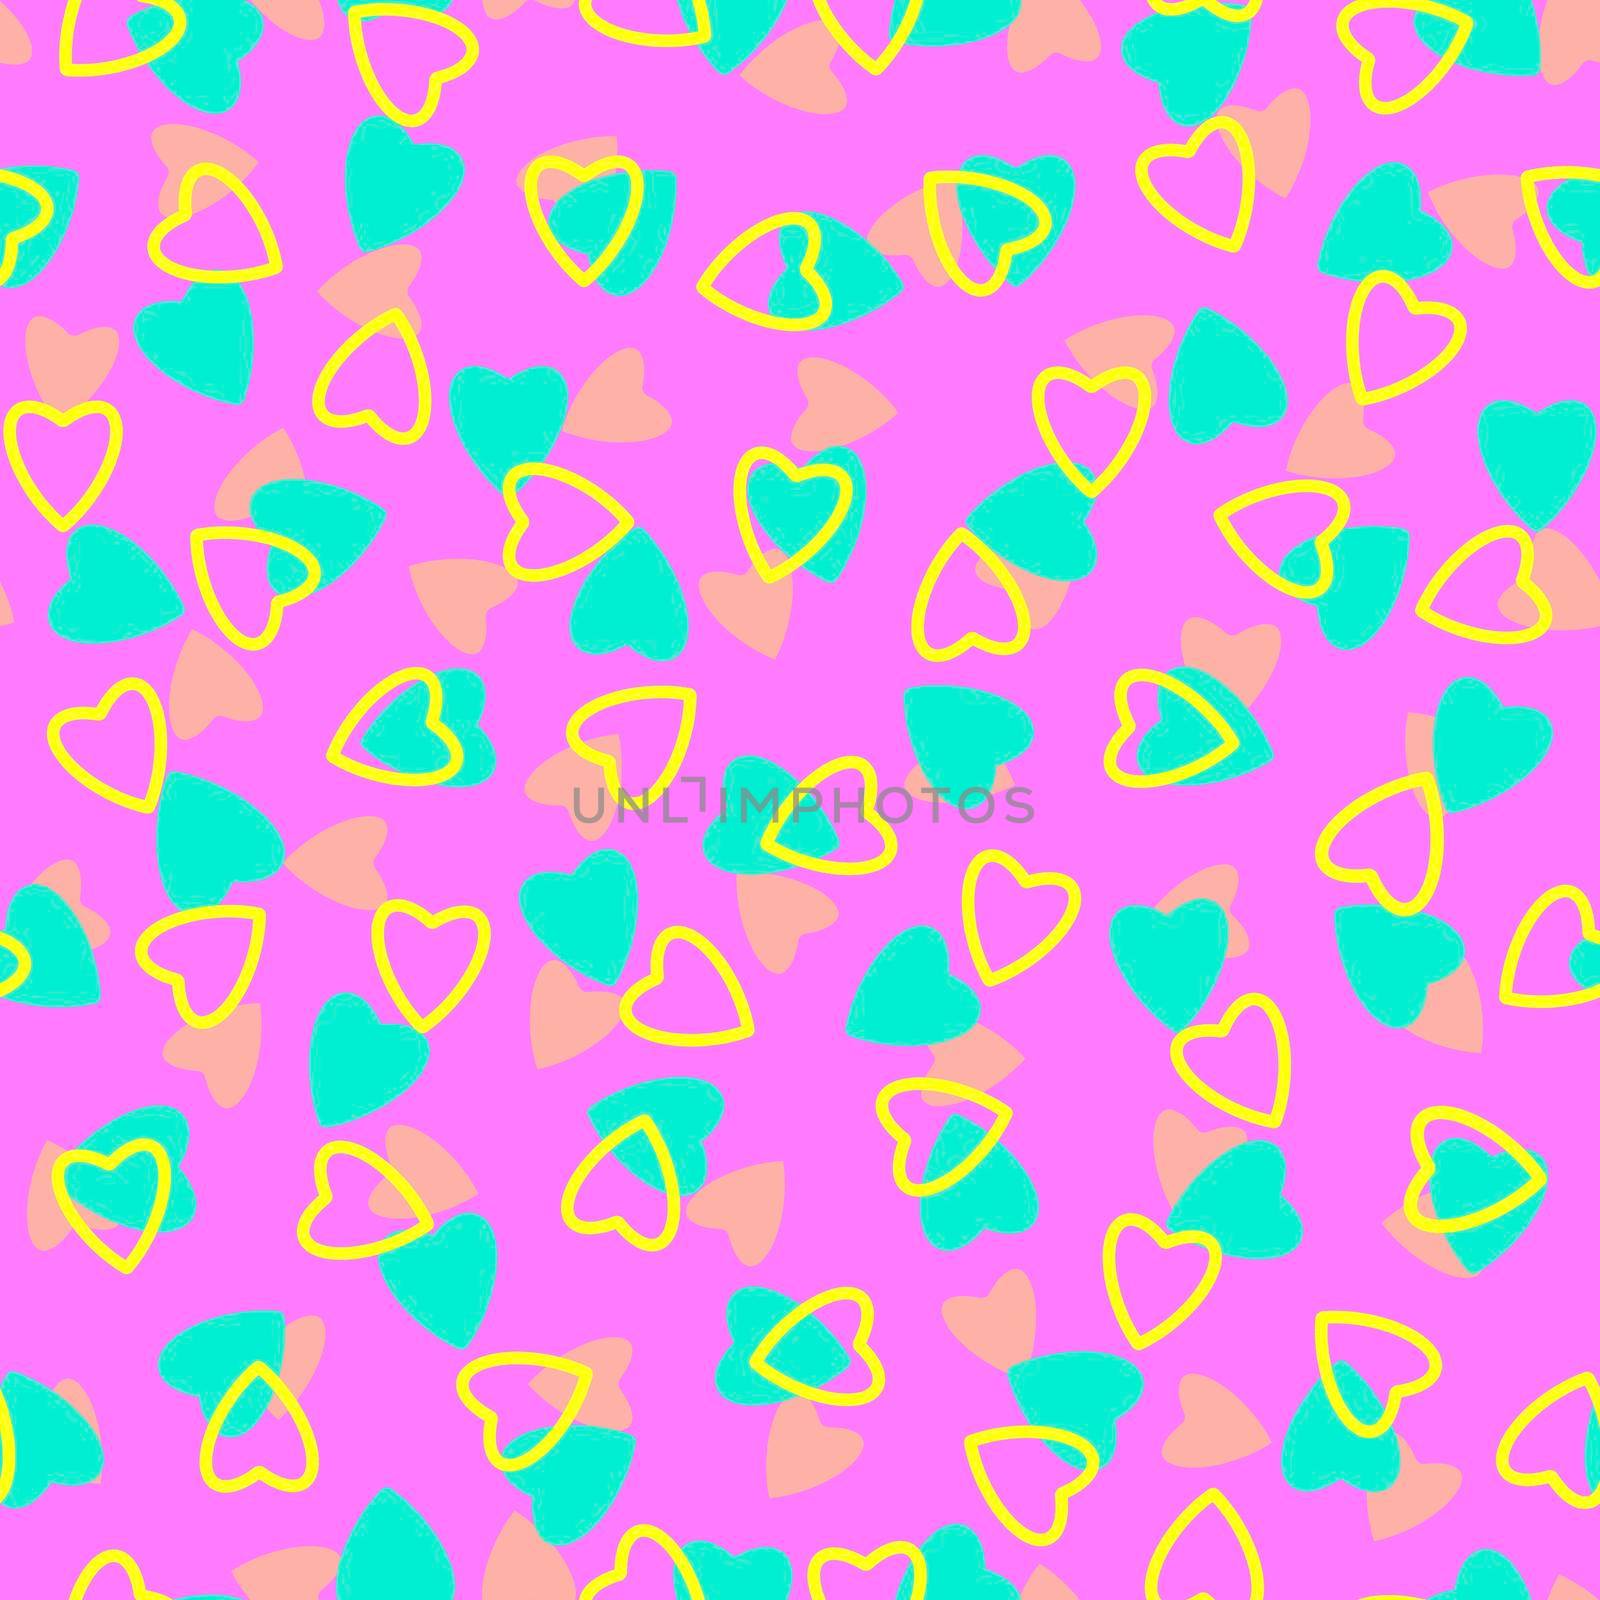 Simple heart seamless pattern,endless chaotic texture made of tiny heart silhouettes.Valentines,mothers day background.Great for Easter,wedding,scrapbook,gift wrapping paper,textiles.Yellow,azure,pink by Angelsmoon